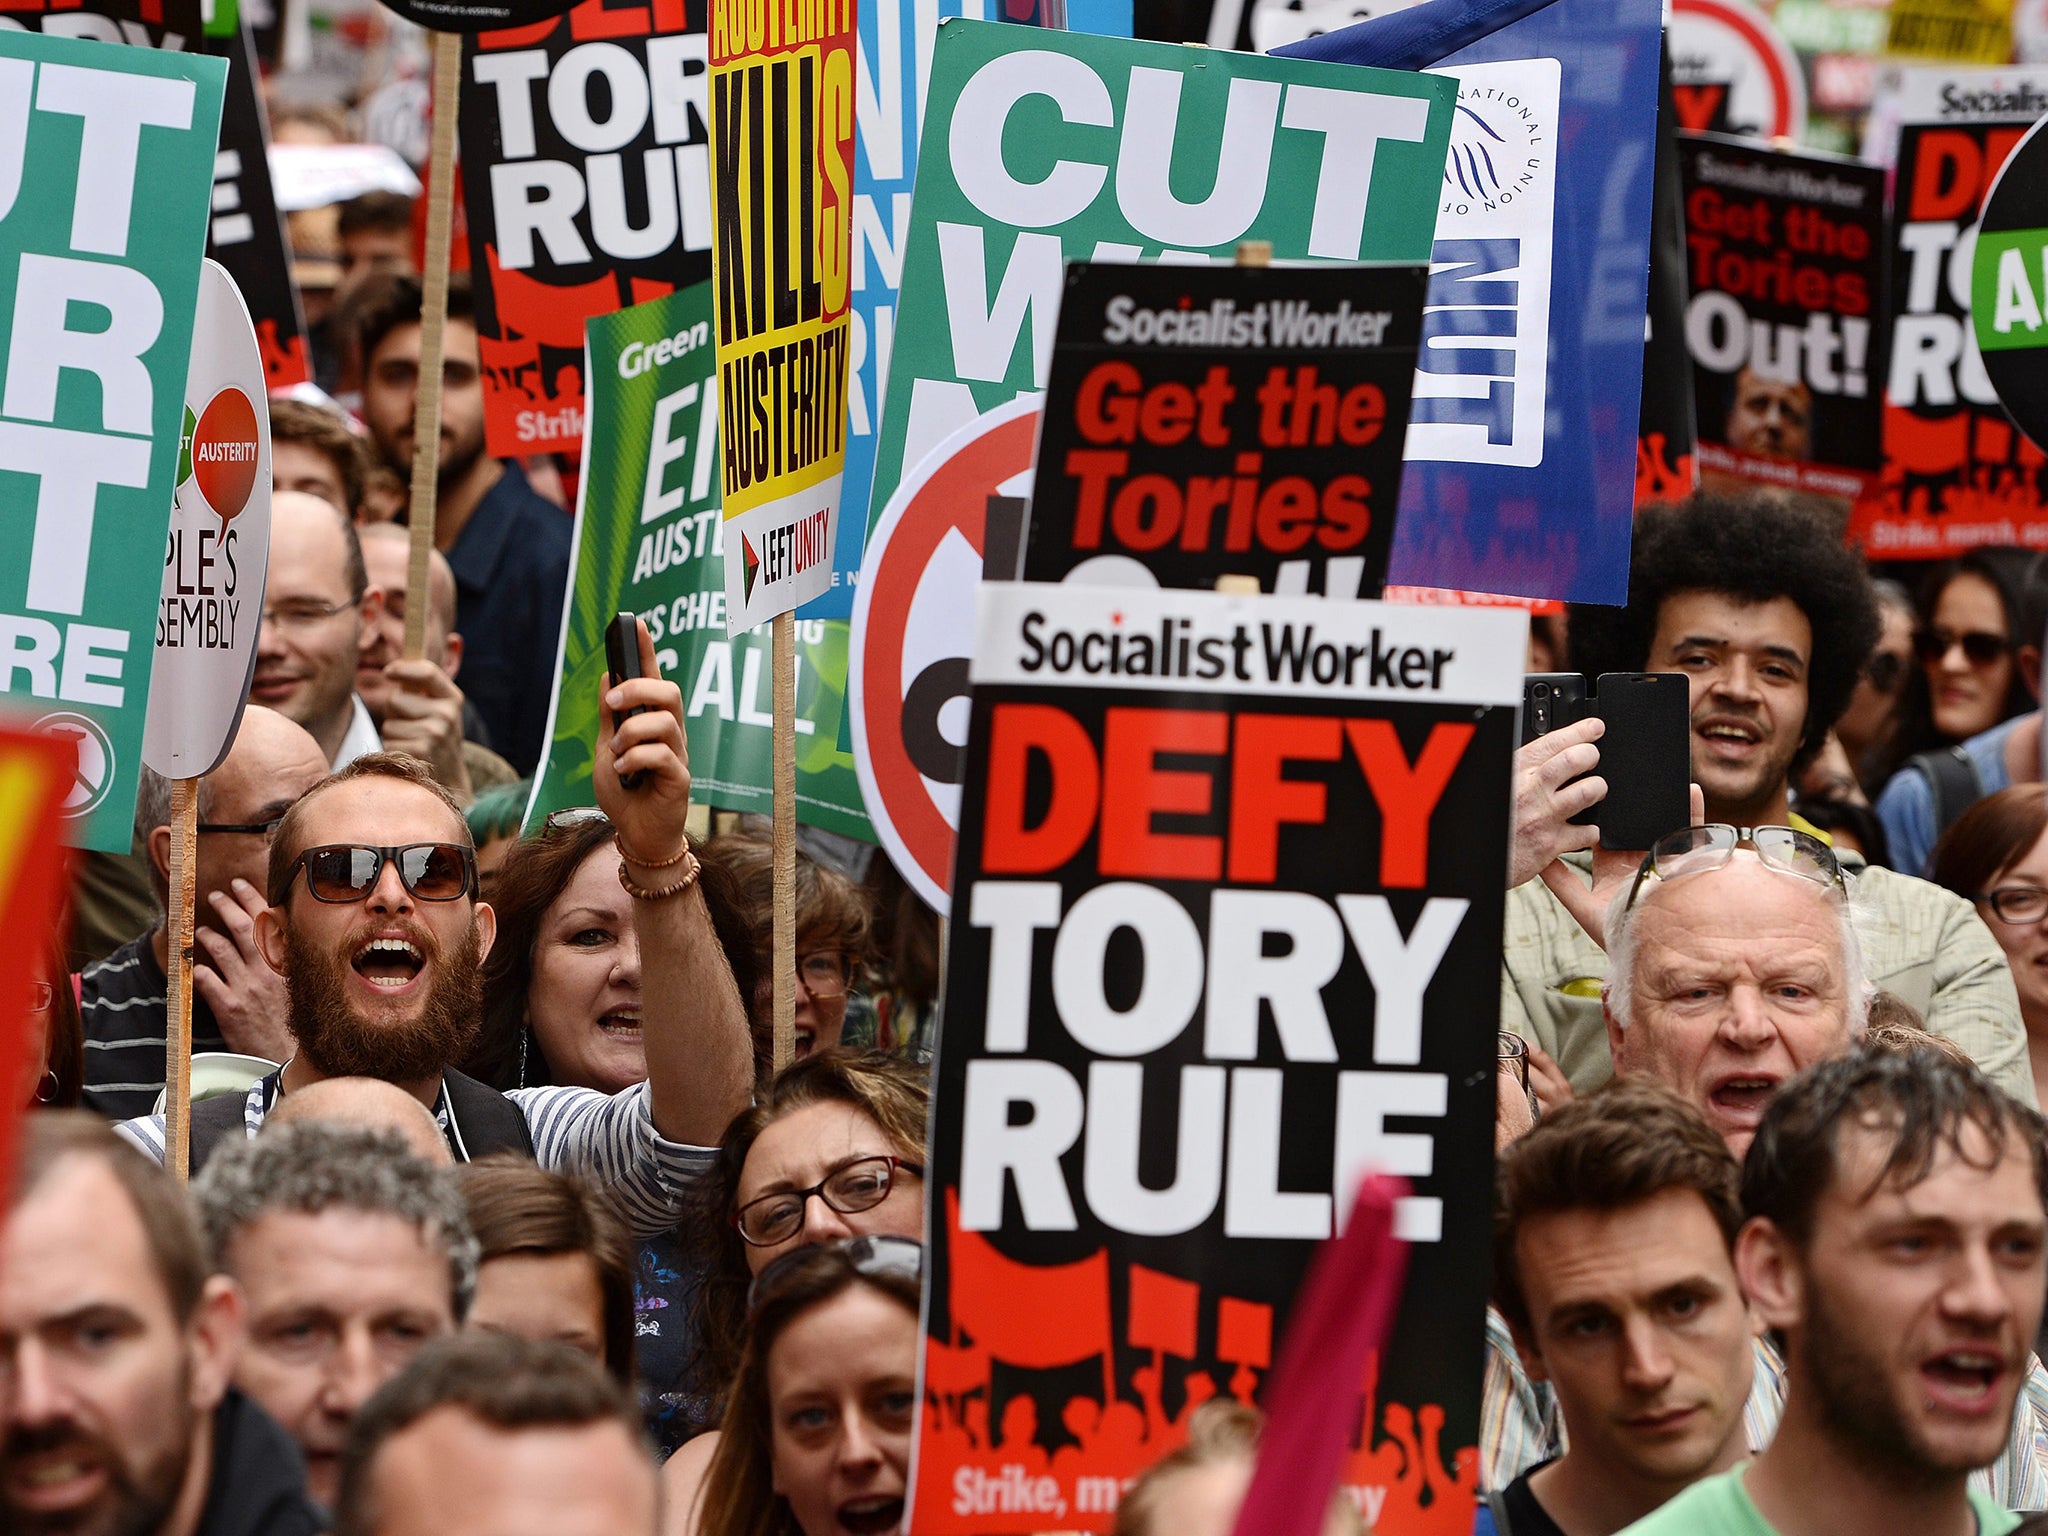 A reported 250,000 protesters marched in London